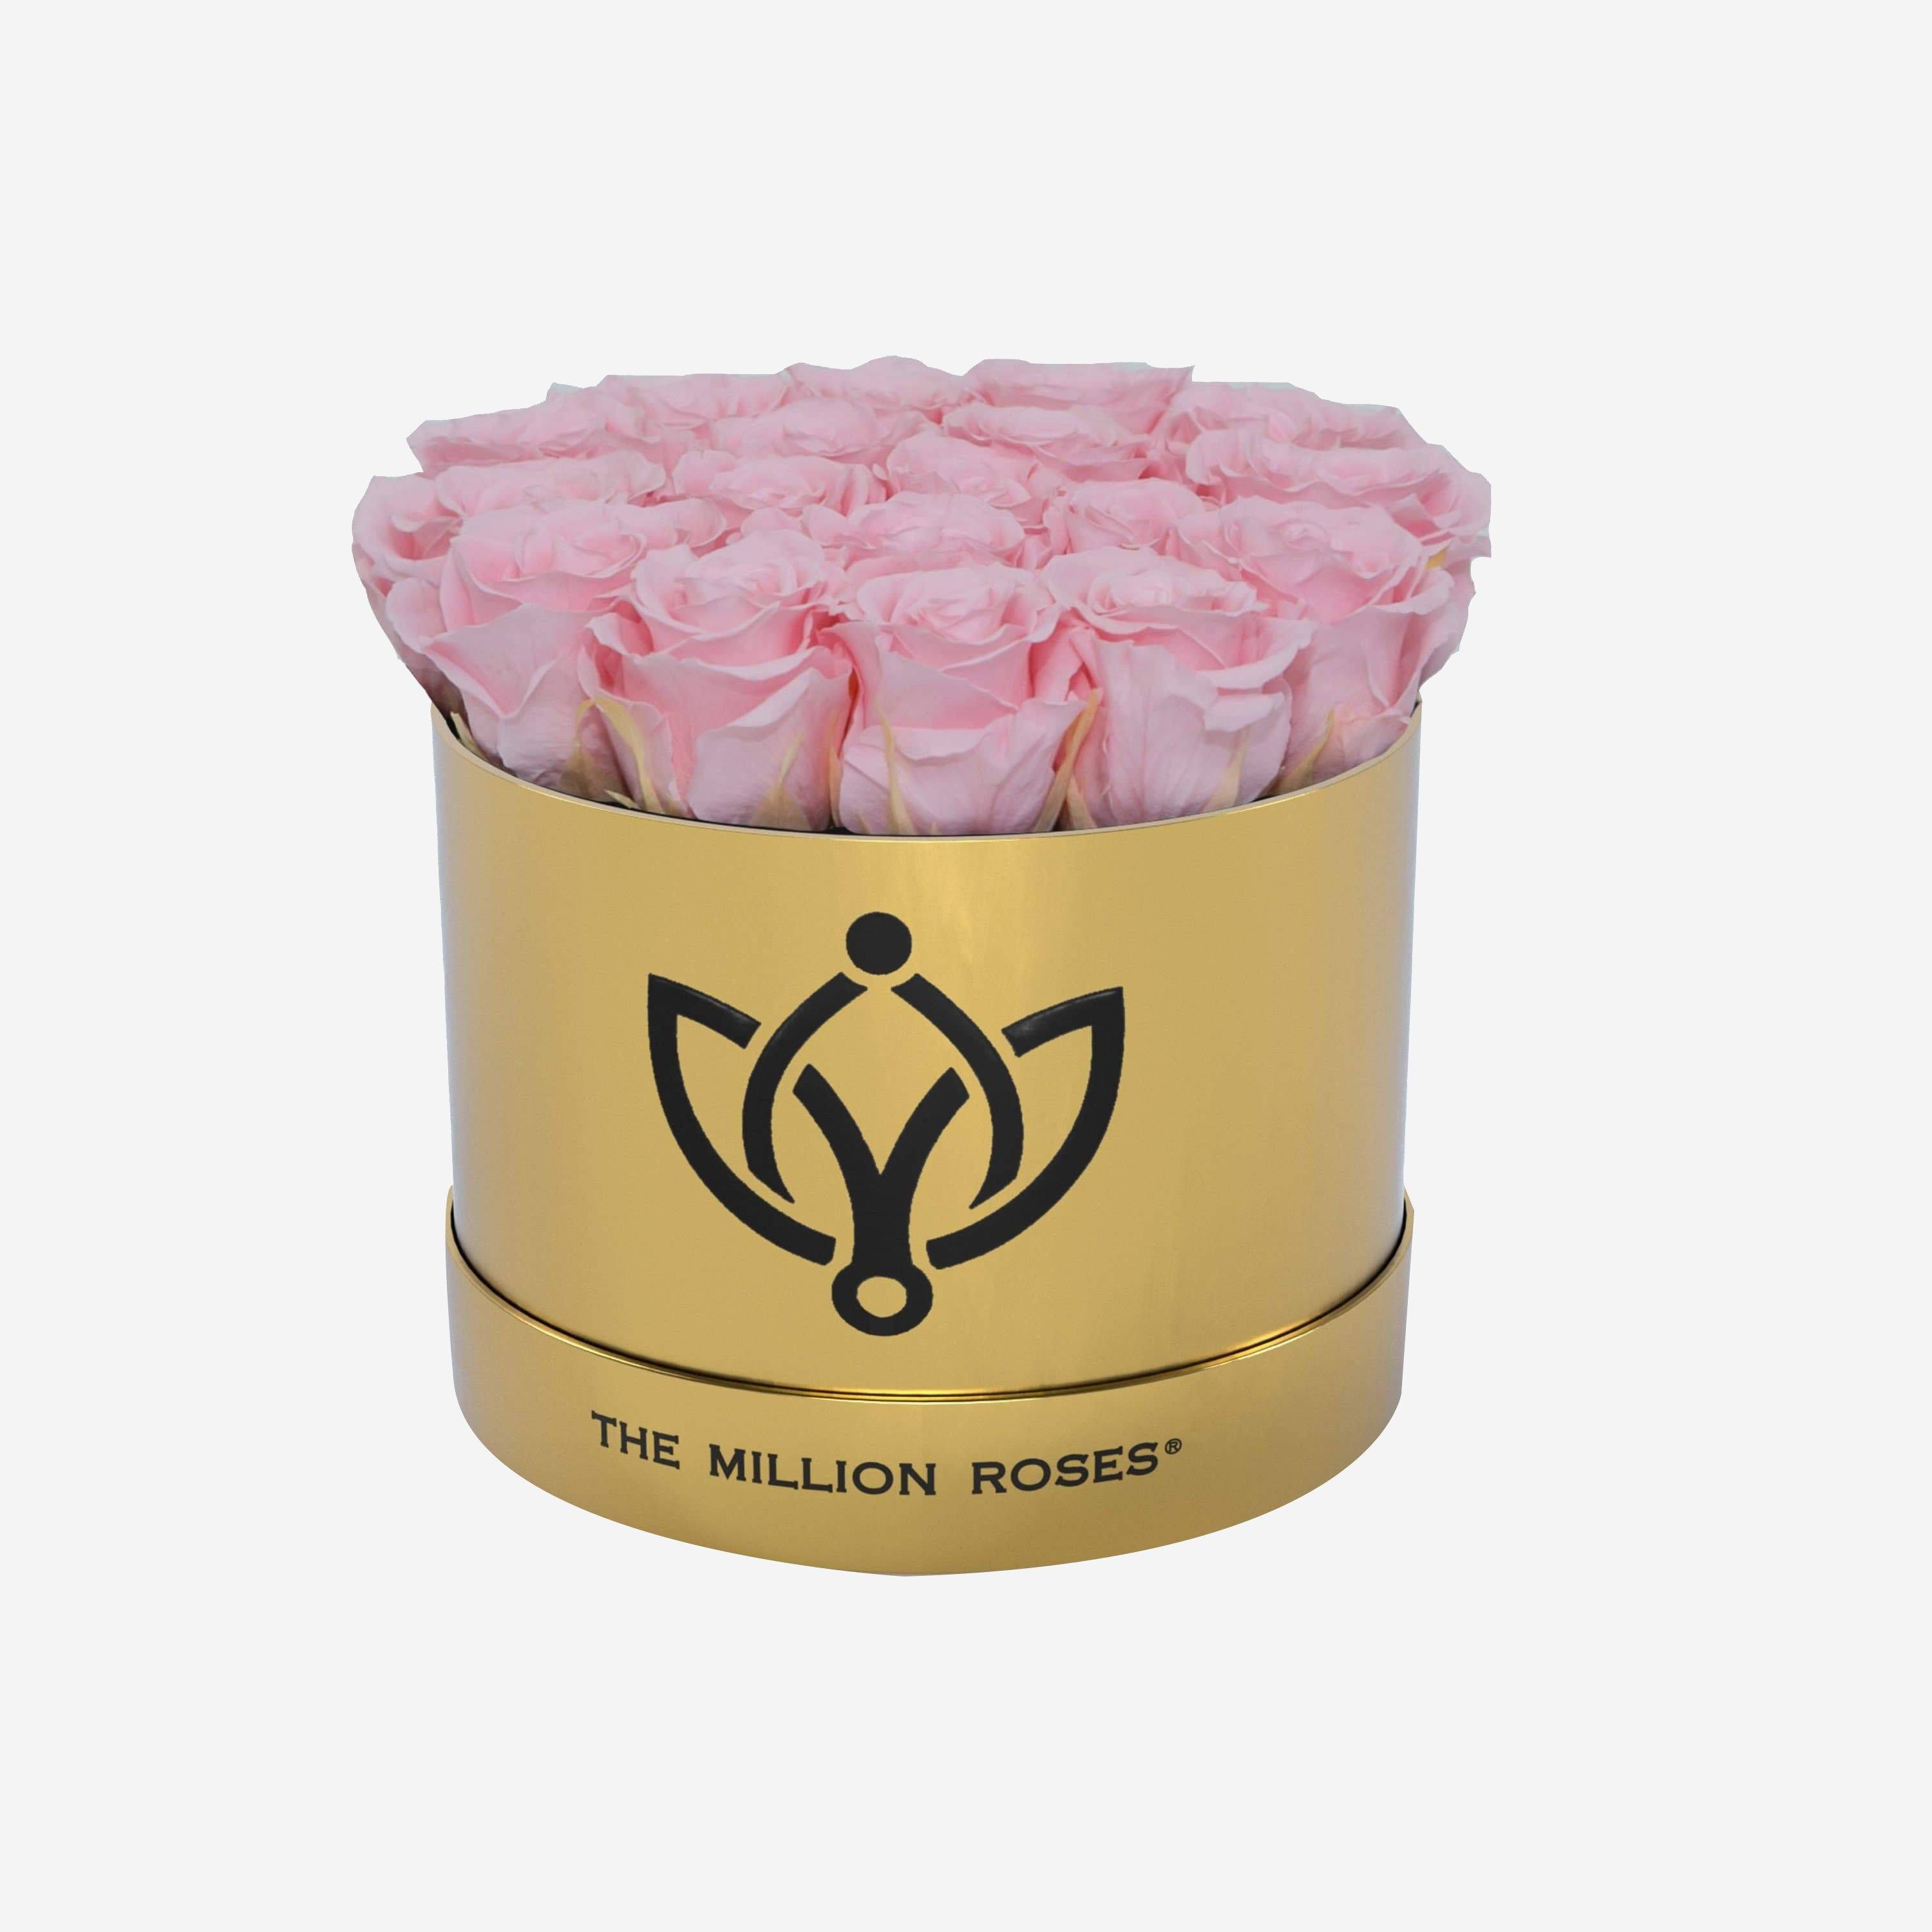 Classic Mirror Gold Box | Light Pink Roses - The Million Roses